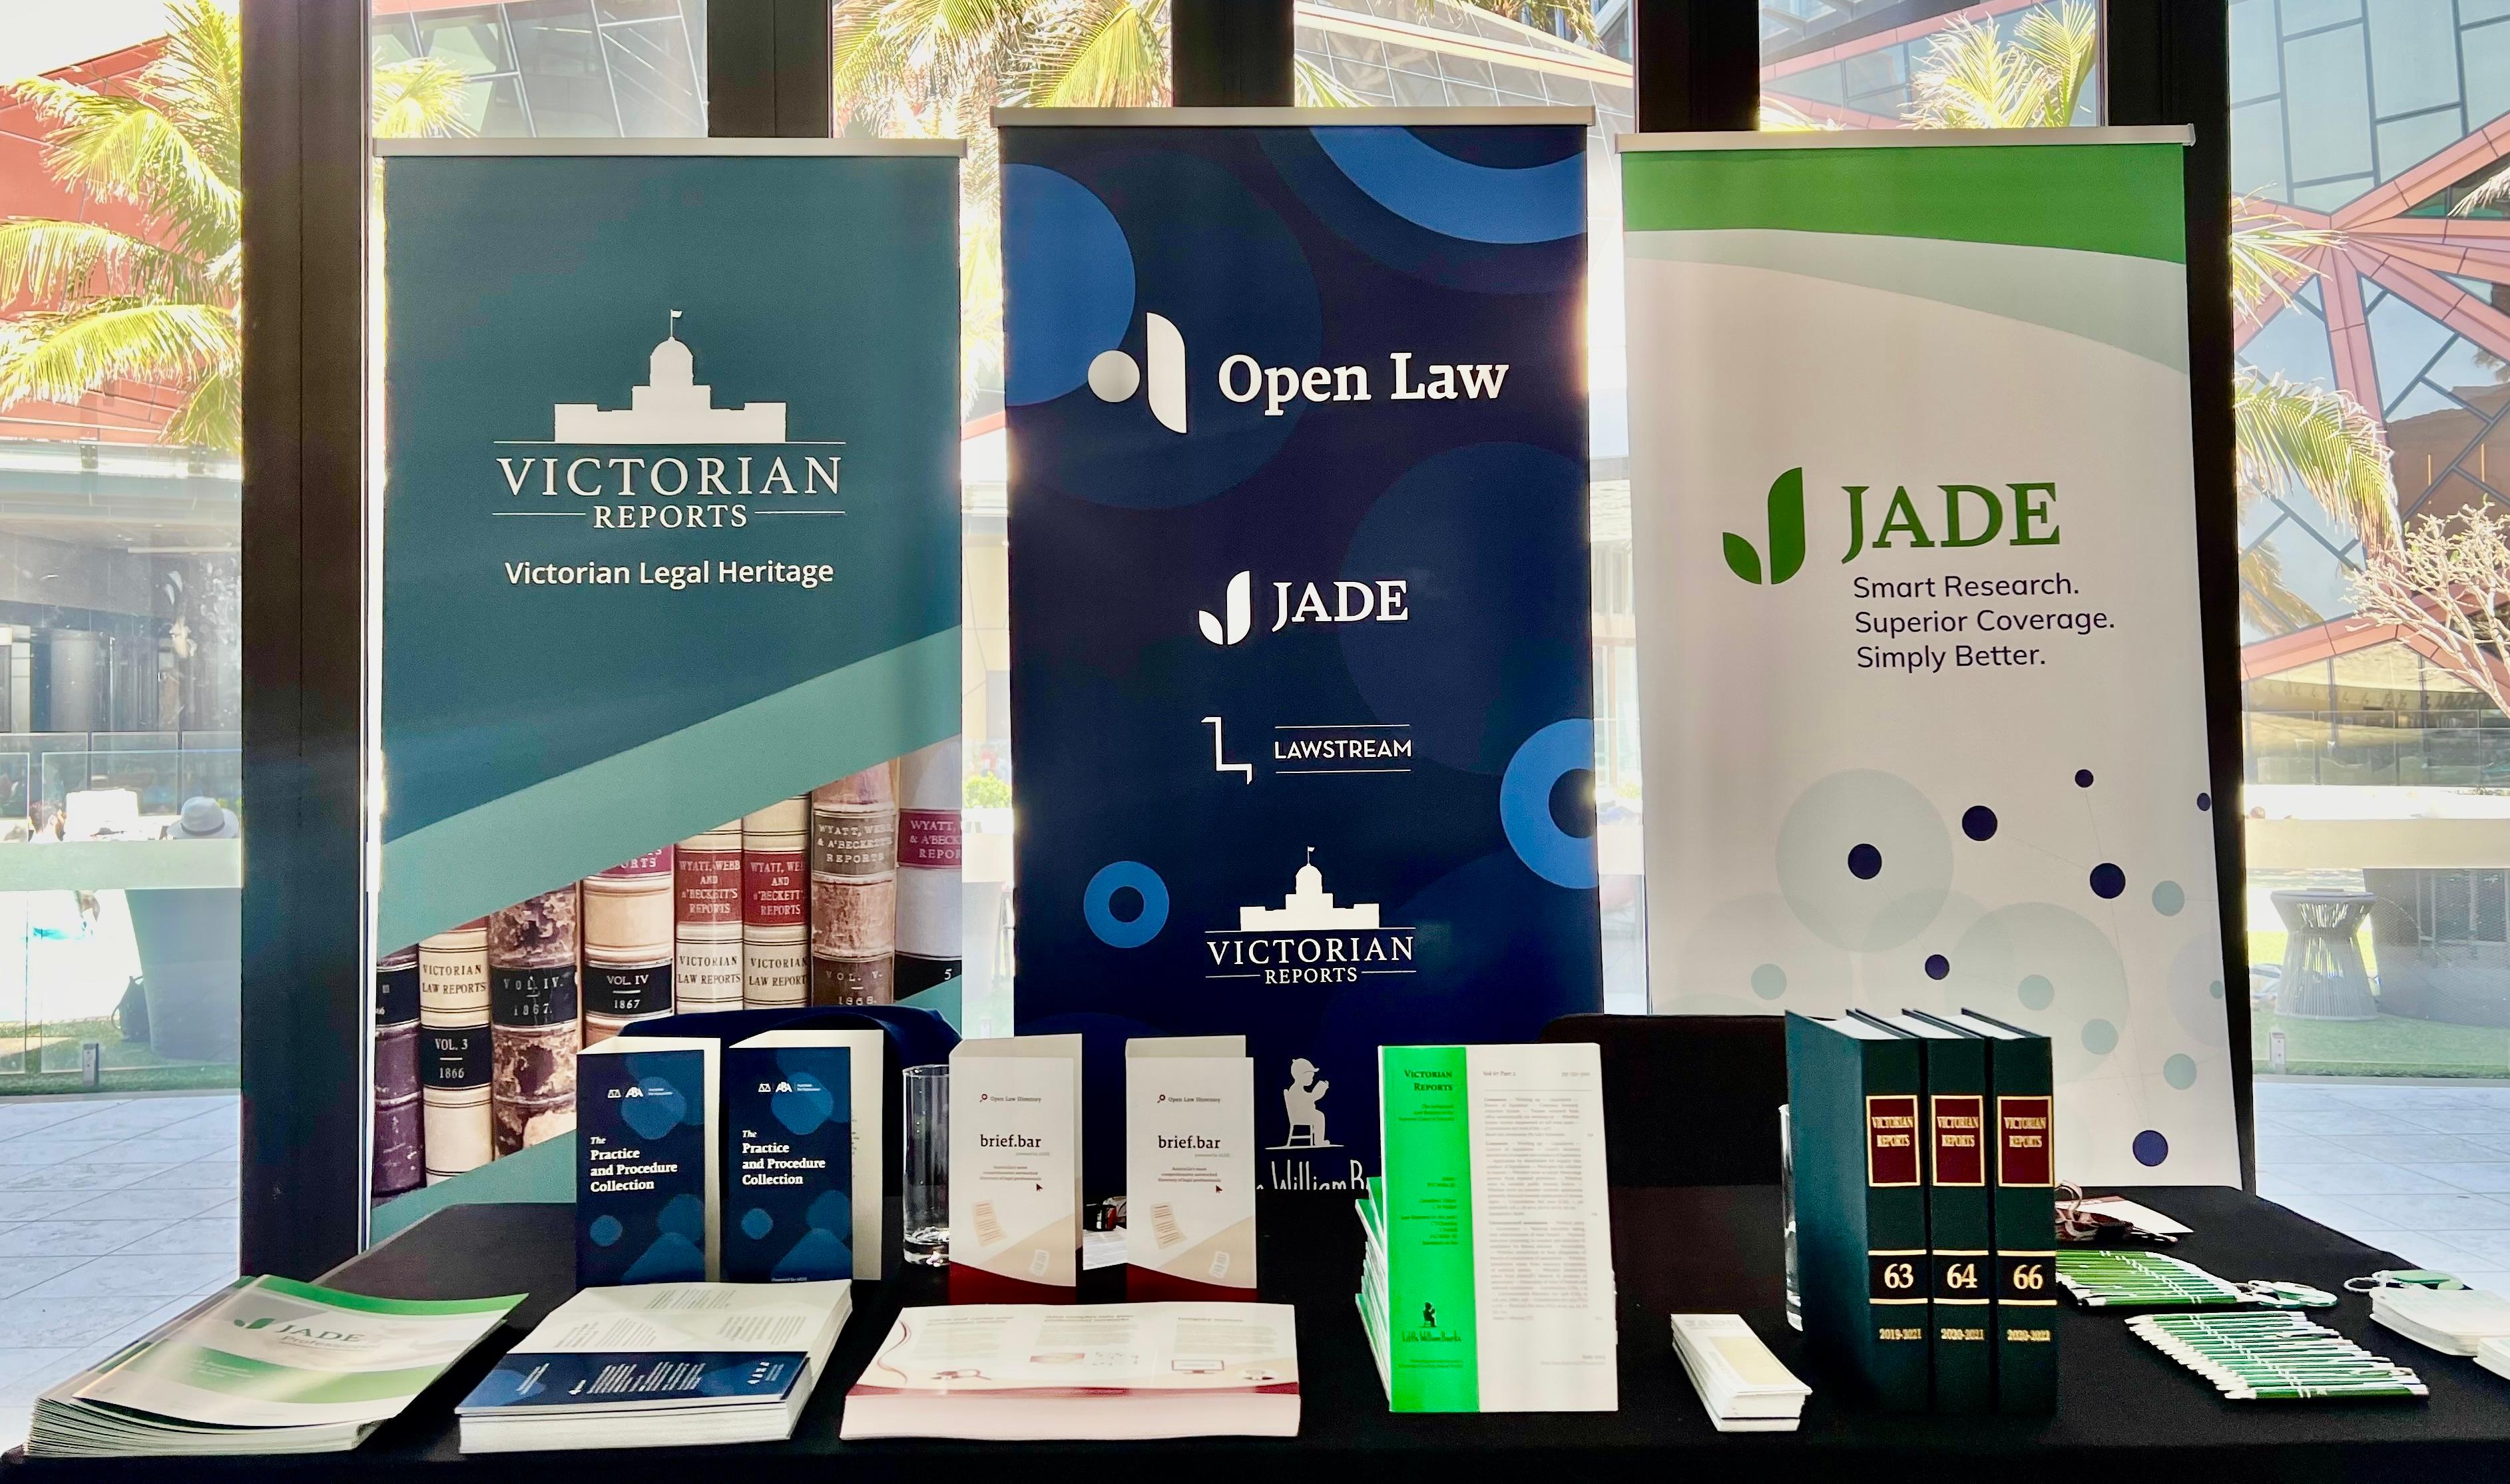 Representing JADE at the 2023 Australian Bar Association's Annual Conference